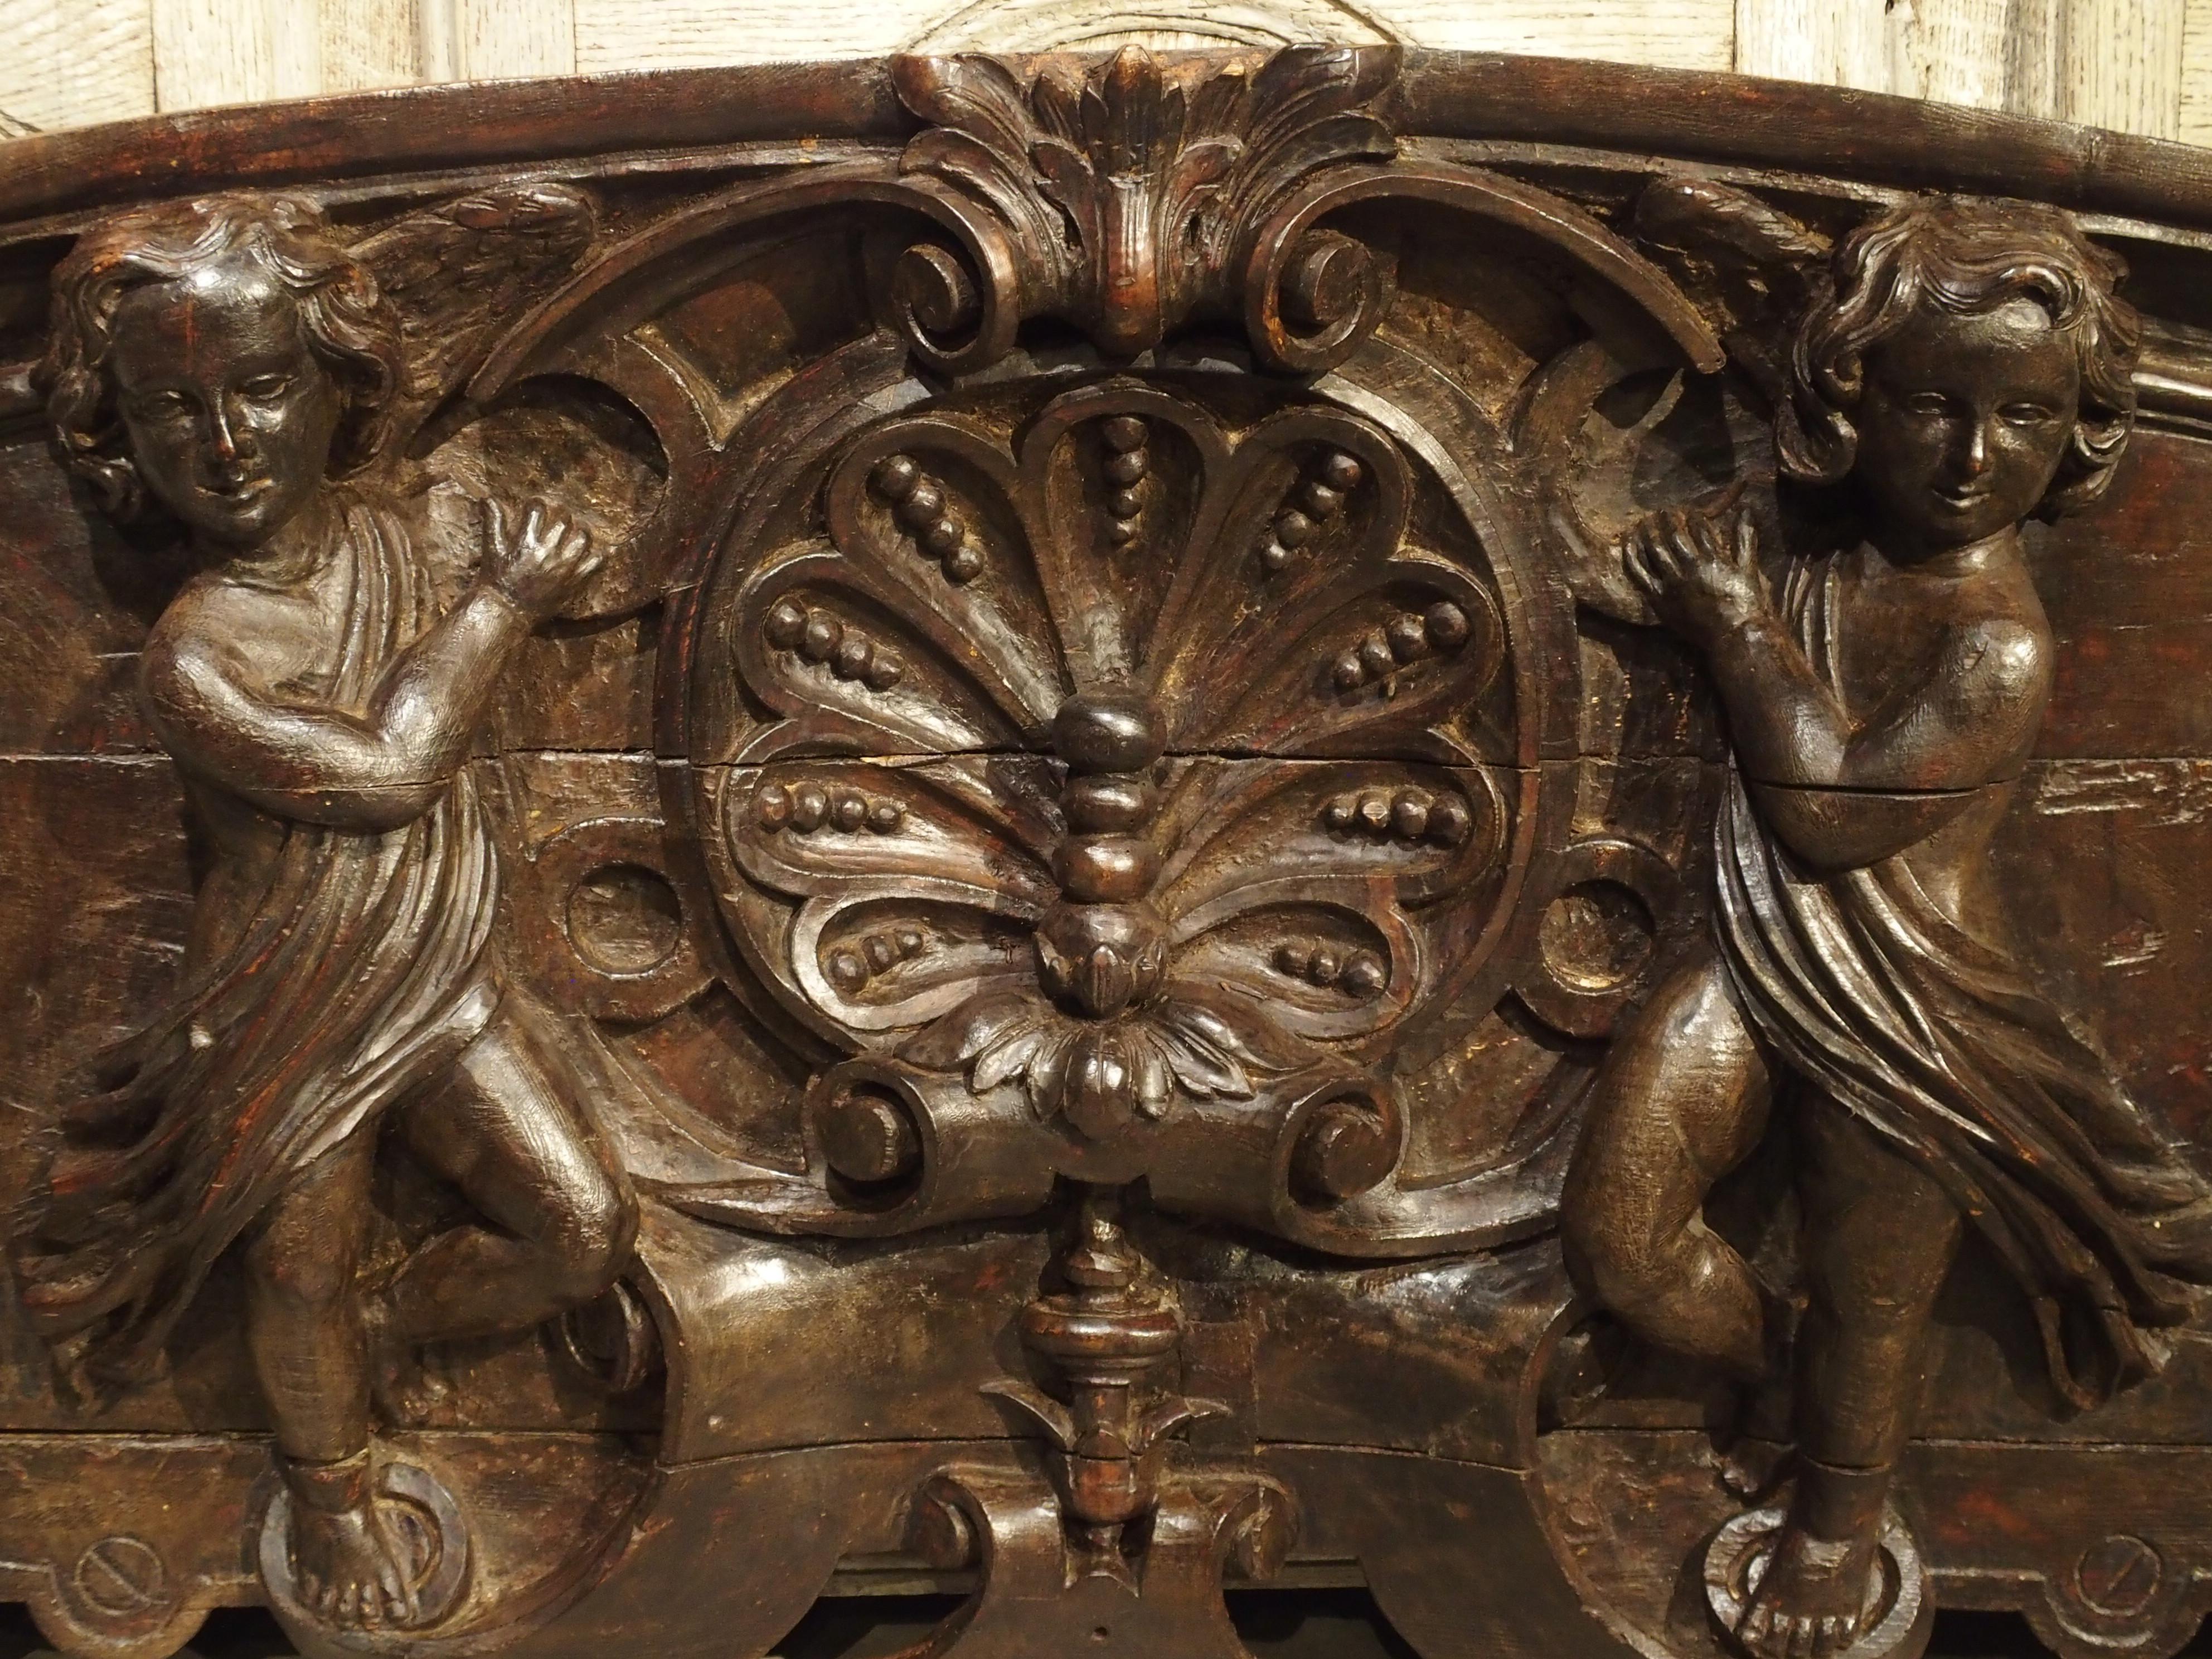 This hand carved wooden overdoor dates to the early 1700s as shown by its main motif at the center. It is called a bat’s wing motif and was used on furniture during the Regence Period, 1700-1723. It is centered within a stylized cartouche, being